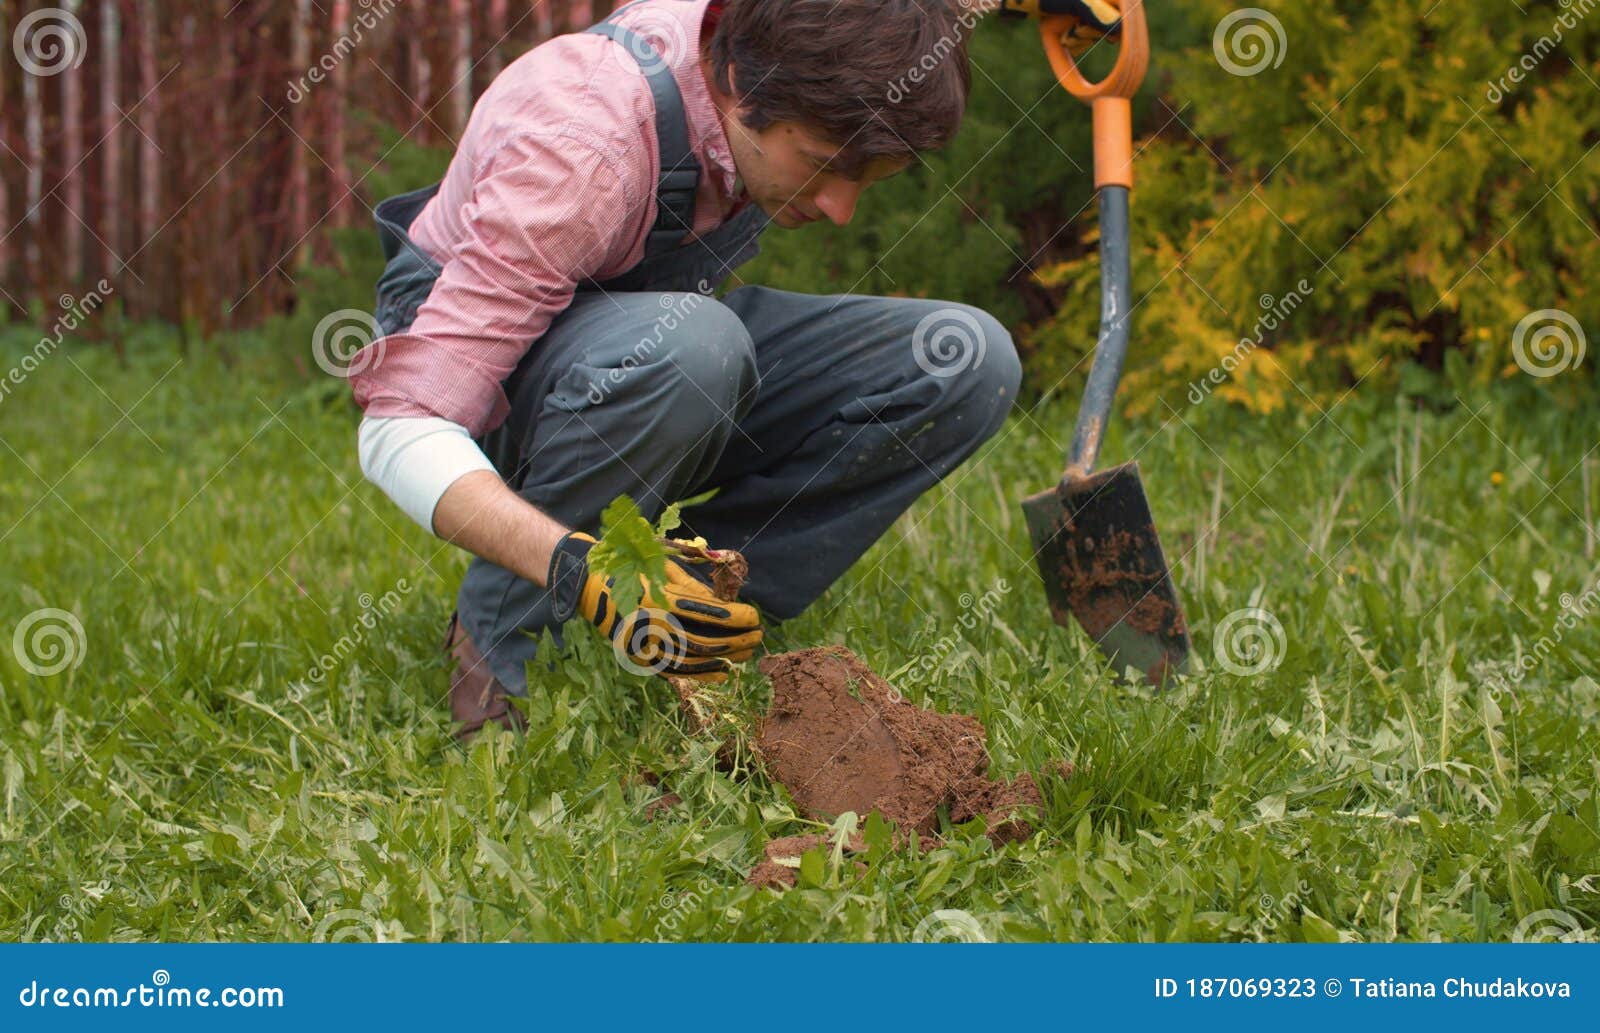 Gardener Digging Ground on a Lawn in the Yard Stock Image - Image of ...